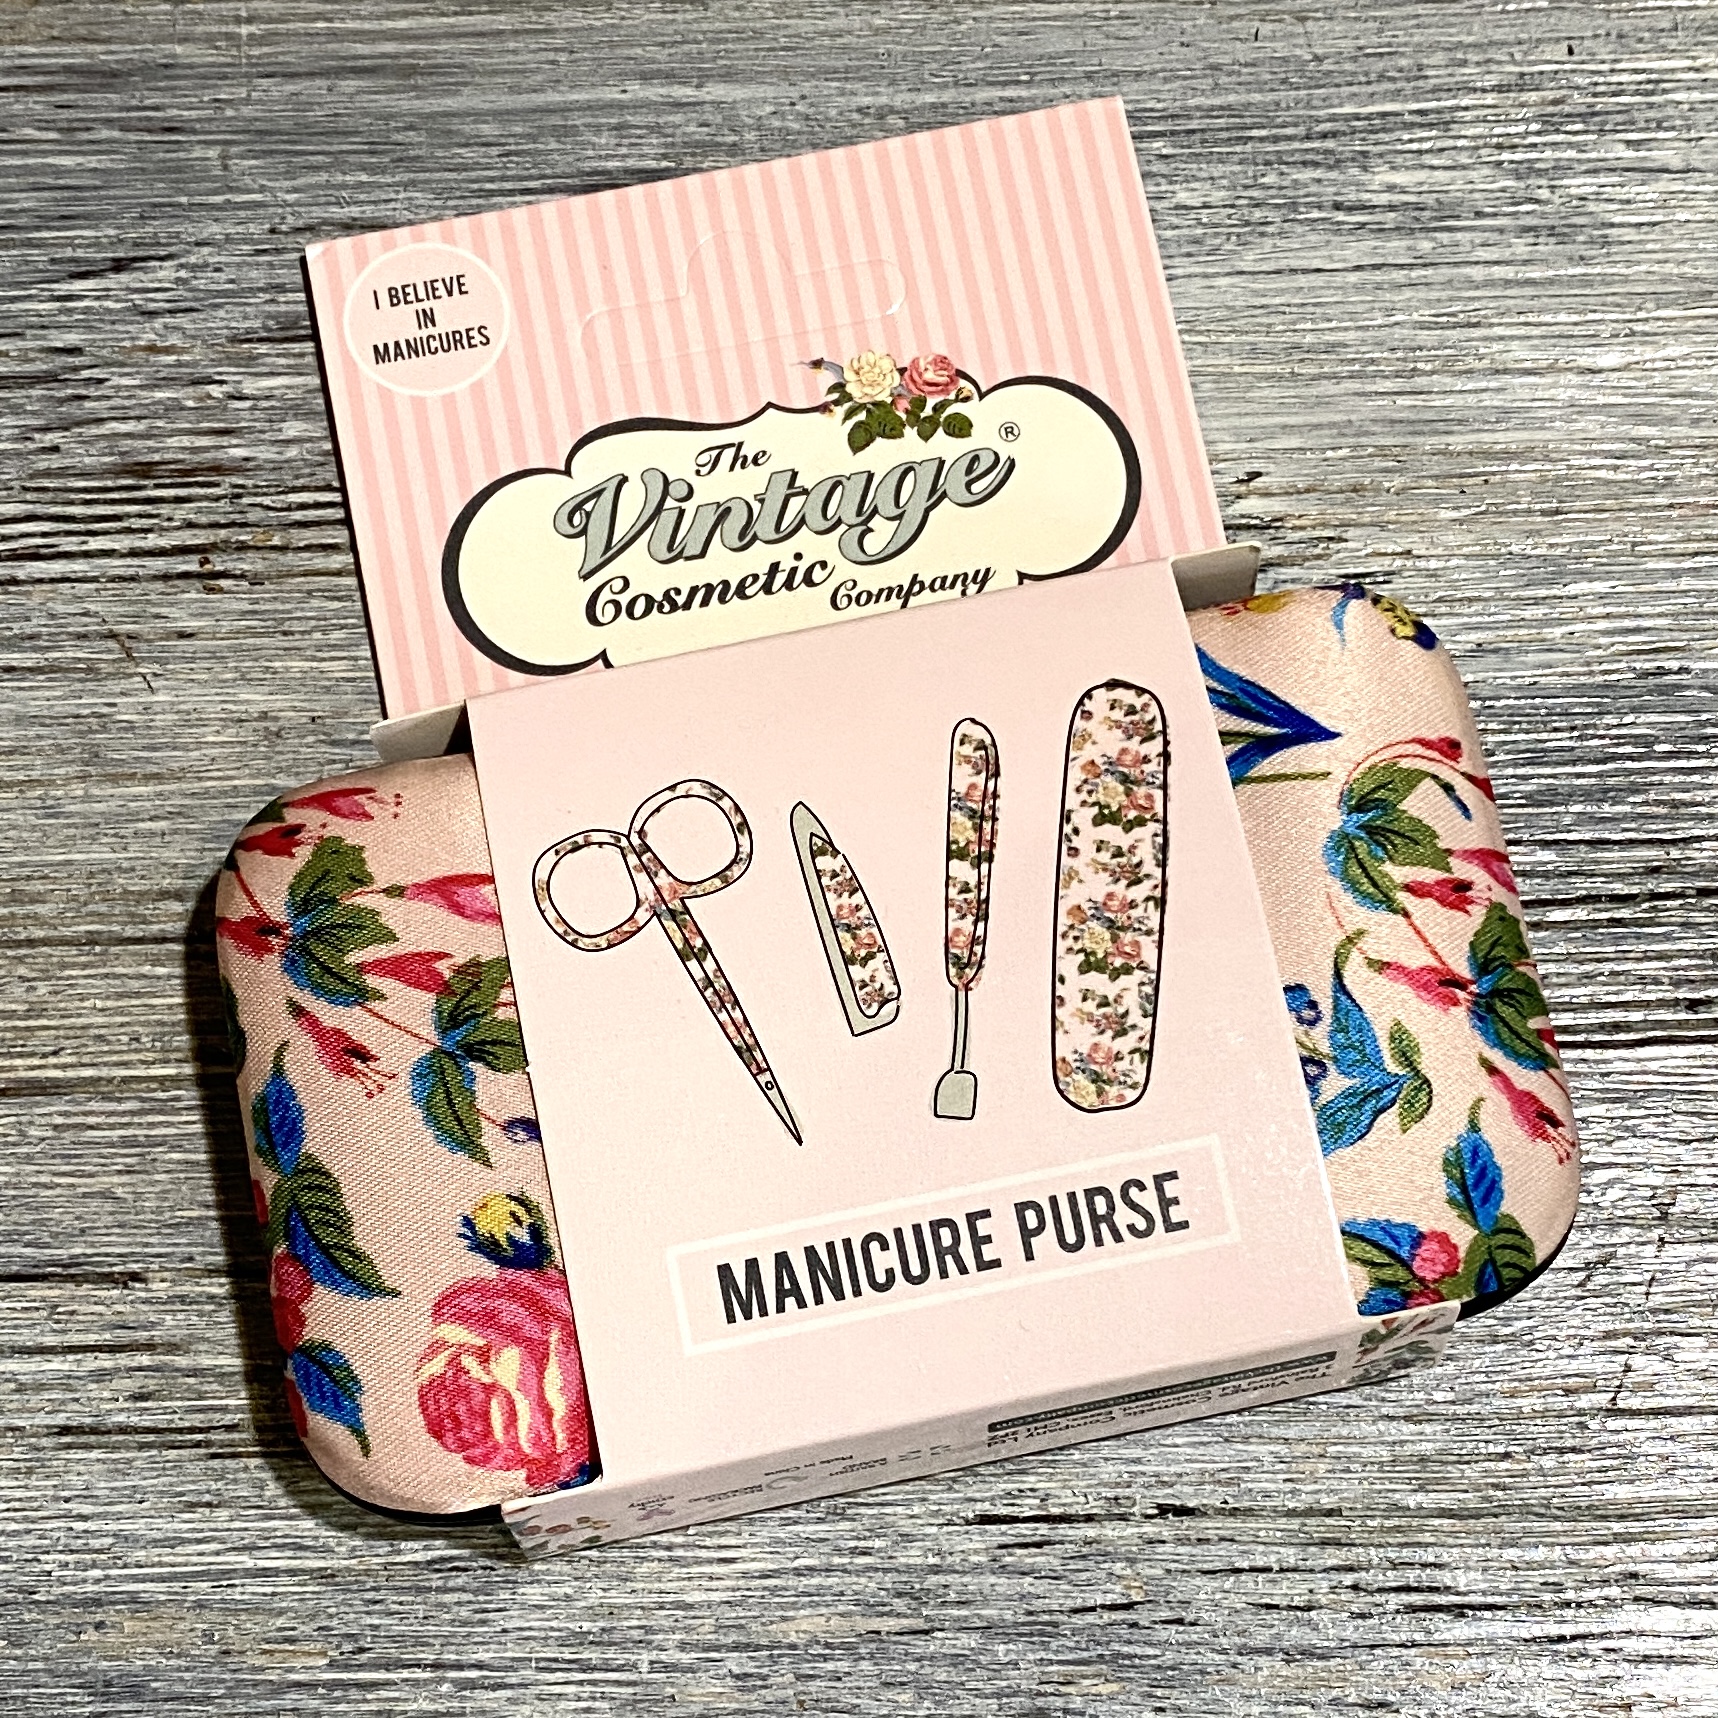 Front of Vintage Cosmetic Co. Manicure Purse Set for Bombay and Cedar The Beauty Box October 2021